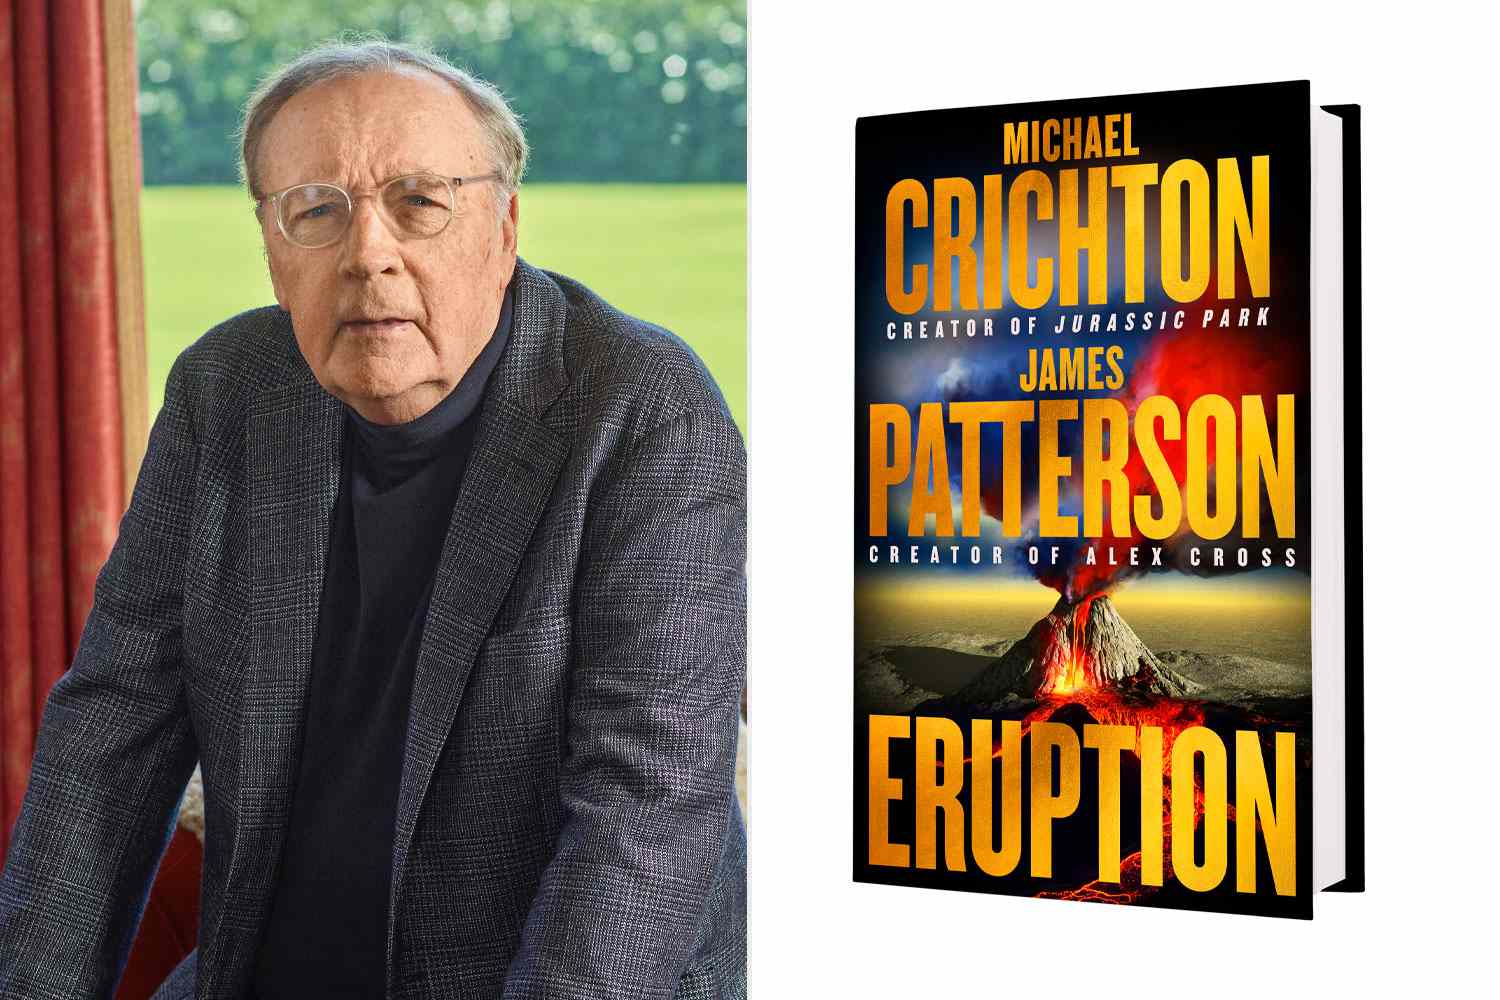 James Patterson Calls Completing Michael Crichton’s Final Novel ‘One of the Best Things I’ve Done’ (Exclusive)